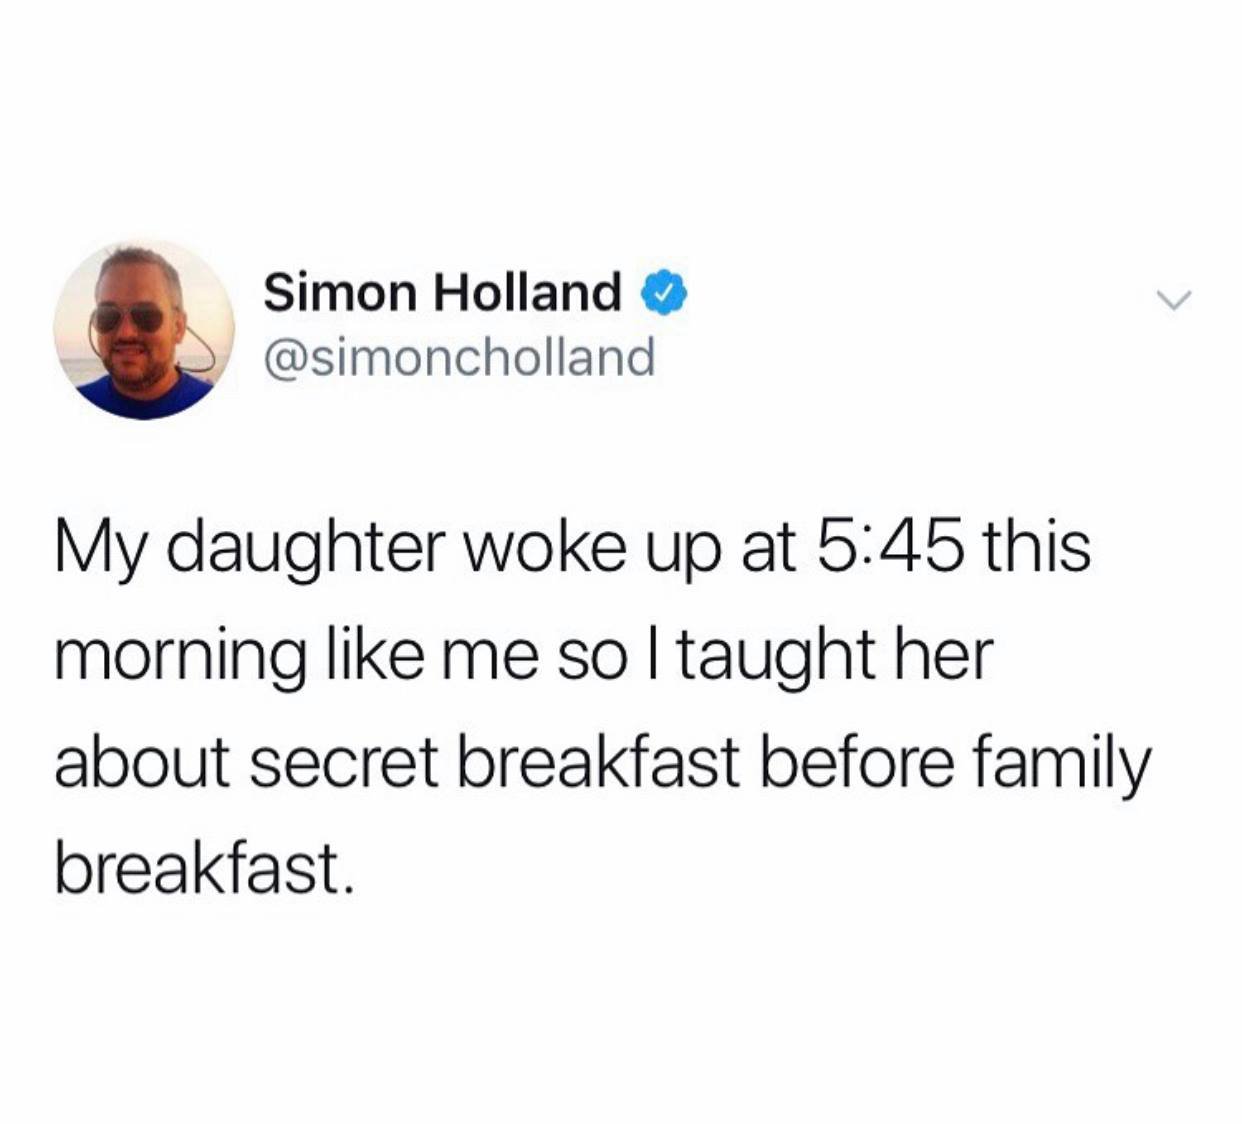 bill murray pothole tweet - Simon Holland My daughter woke up at this morning me so I taught her about secret breakfast before family breakfast.